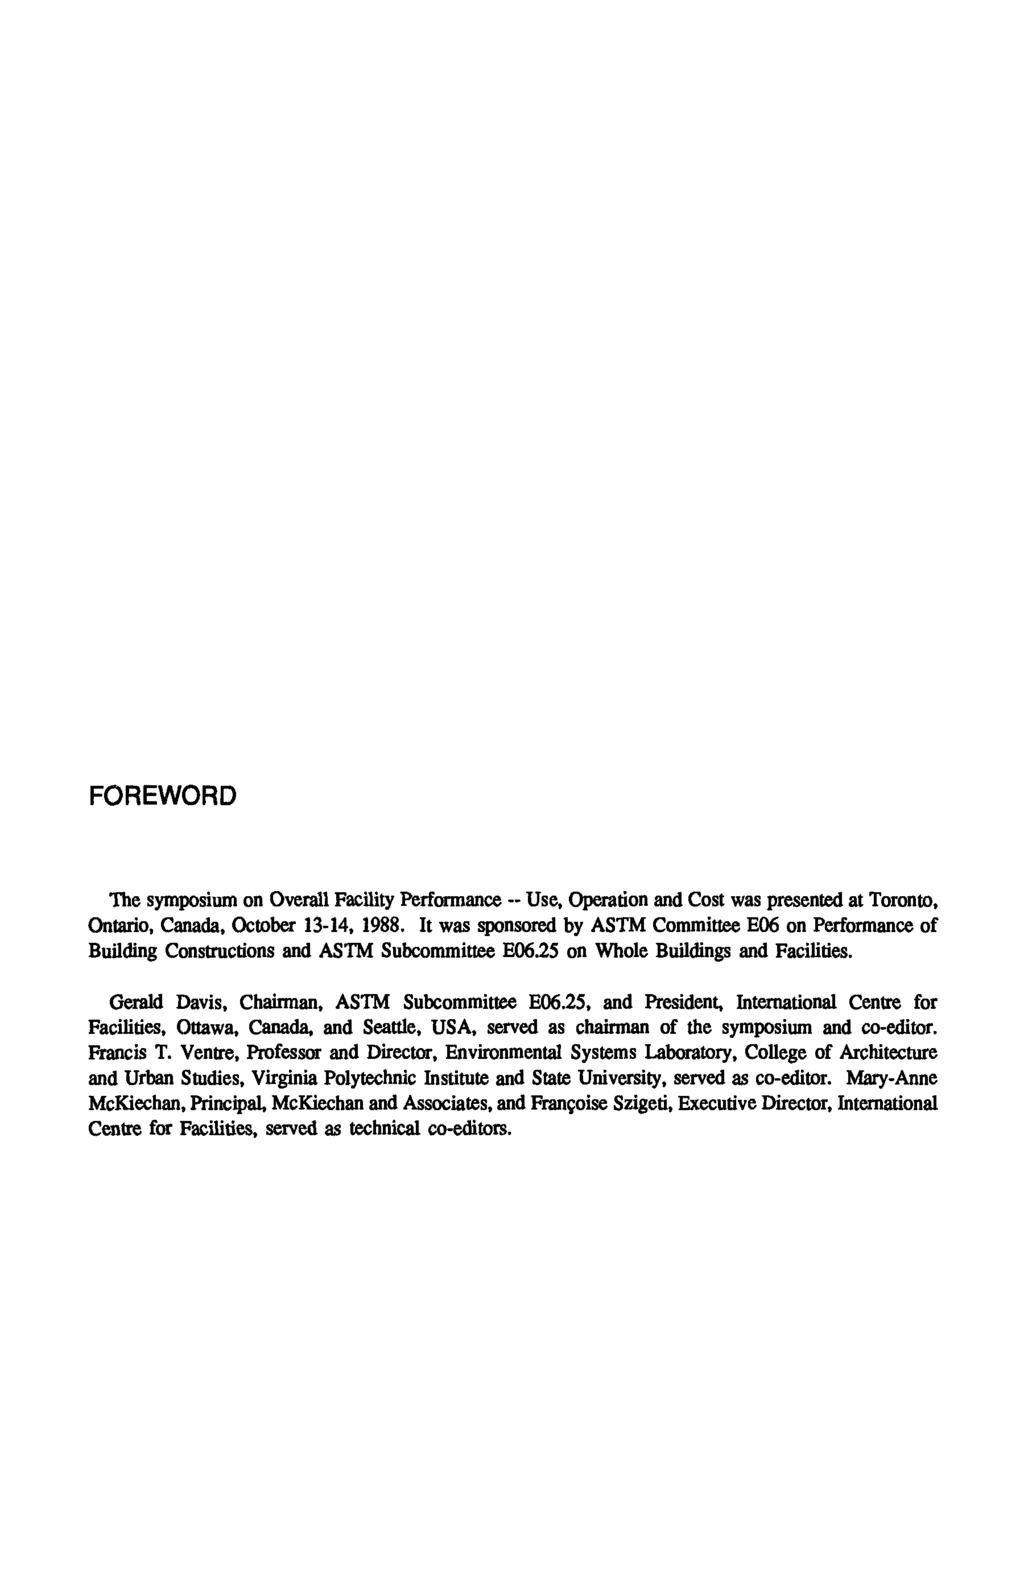 FOREWORD The sytrq~osium on Overall Facility Performance -- Use, Operation and Cost was presented at Toronto, Ontario, Canada, October 13-14, 1988.